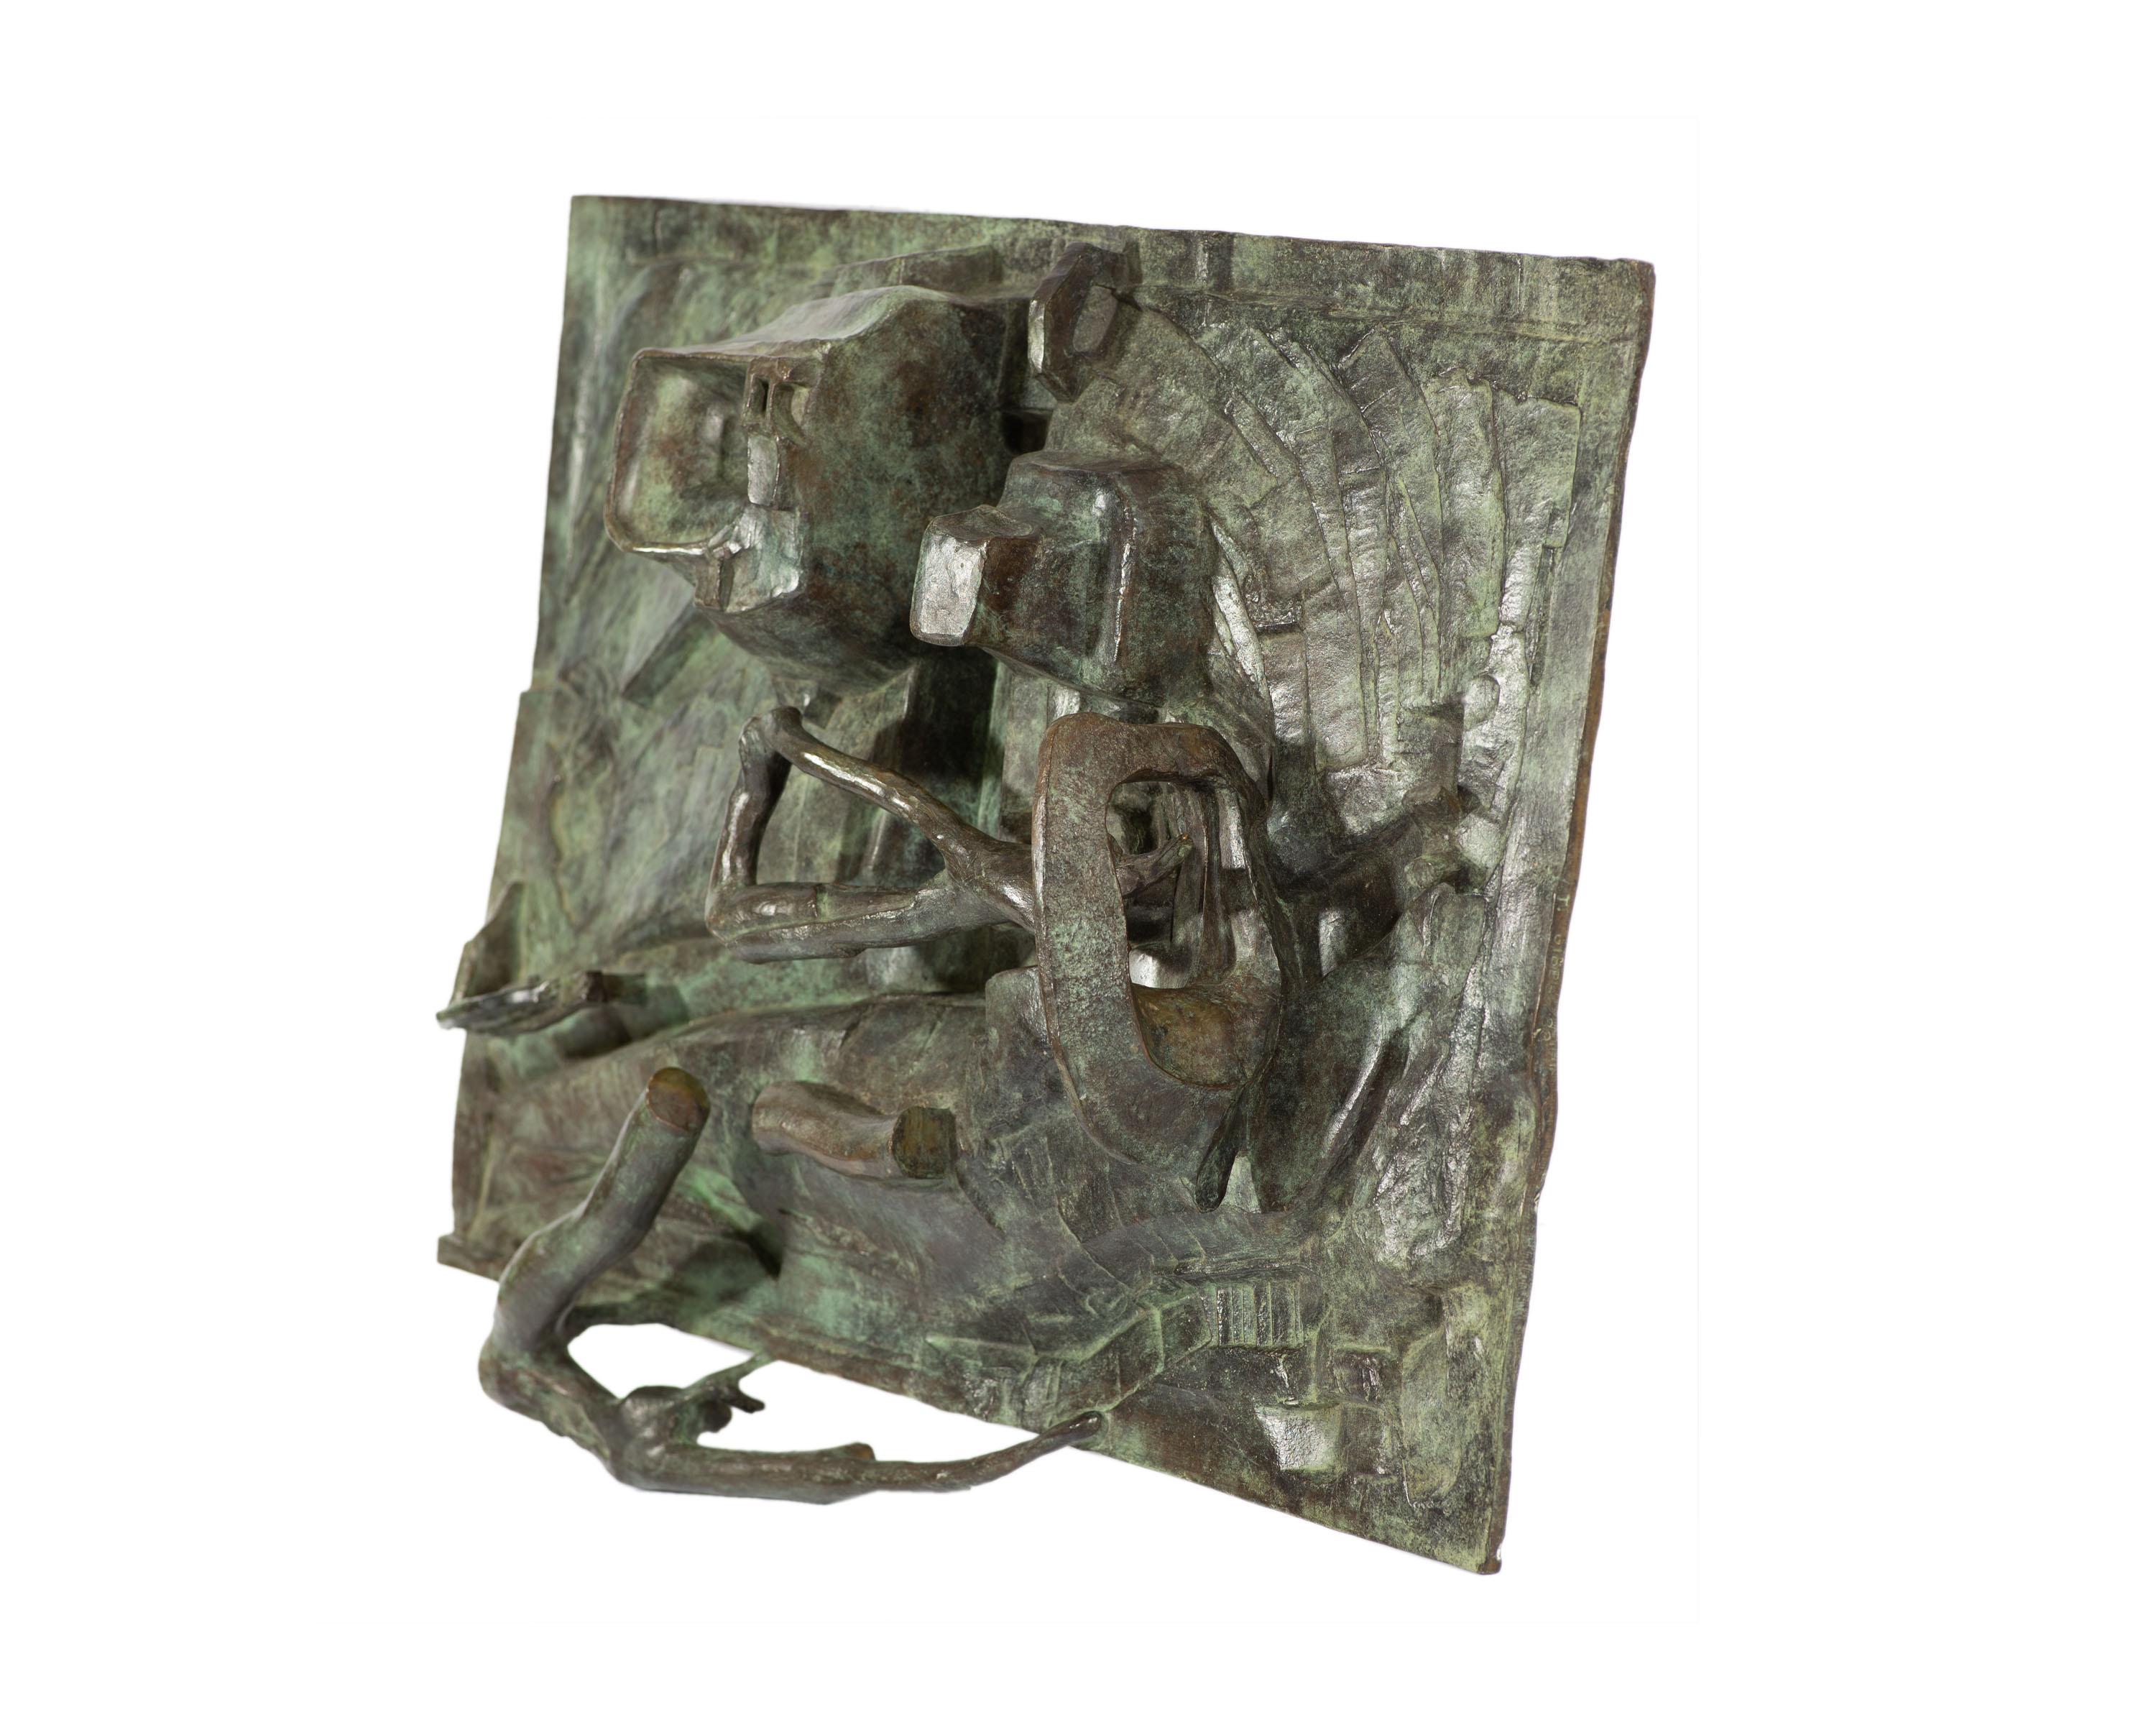 A cast bronze wall sculpture by American artist Tom Gibbs. Made in 1989, this work emanates a strong presence in any interior style. Illustrative and raised geometric elements extend from a rectangular base. Recessions in the work allude to an